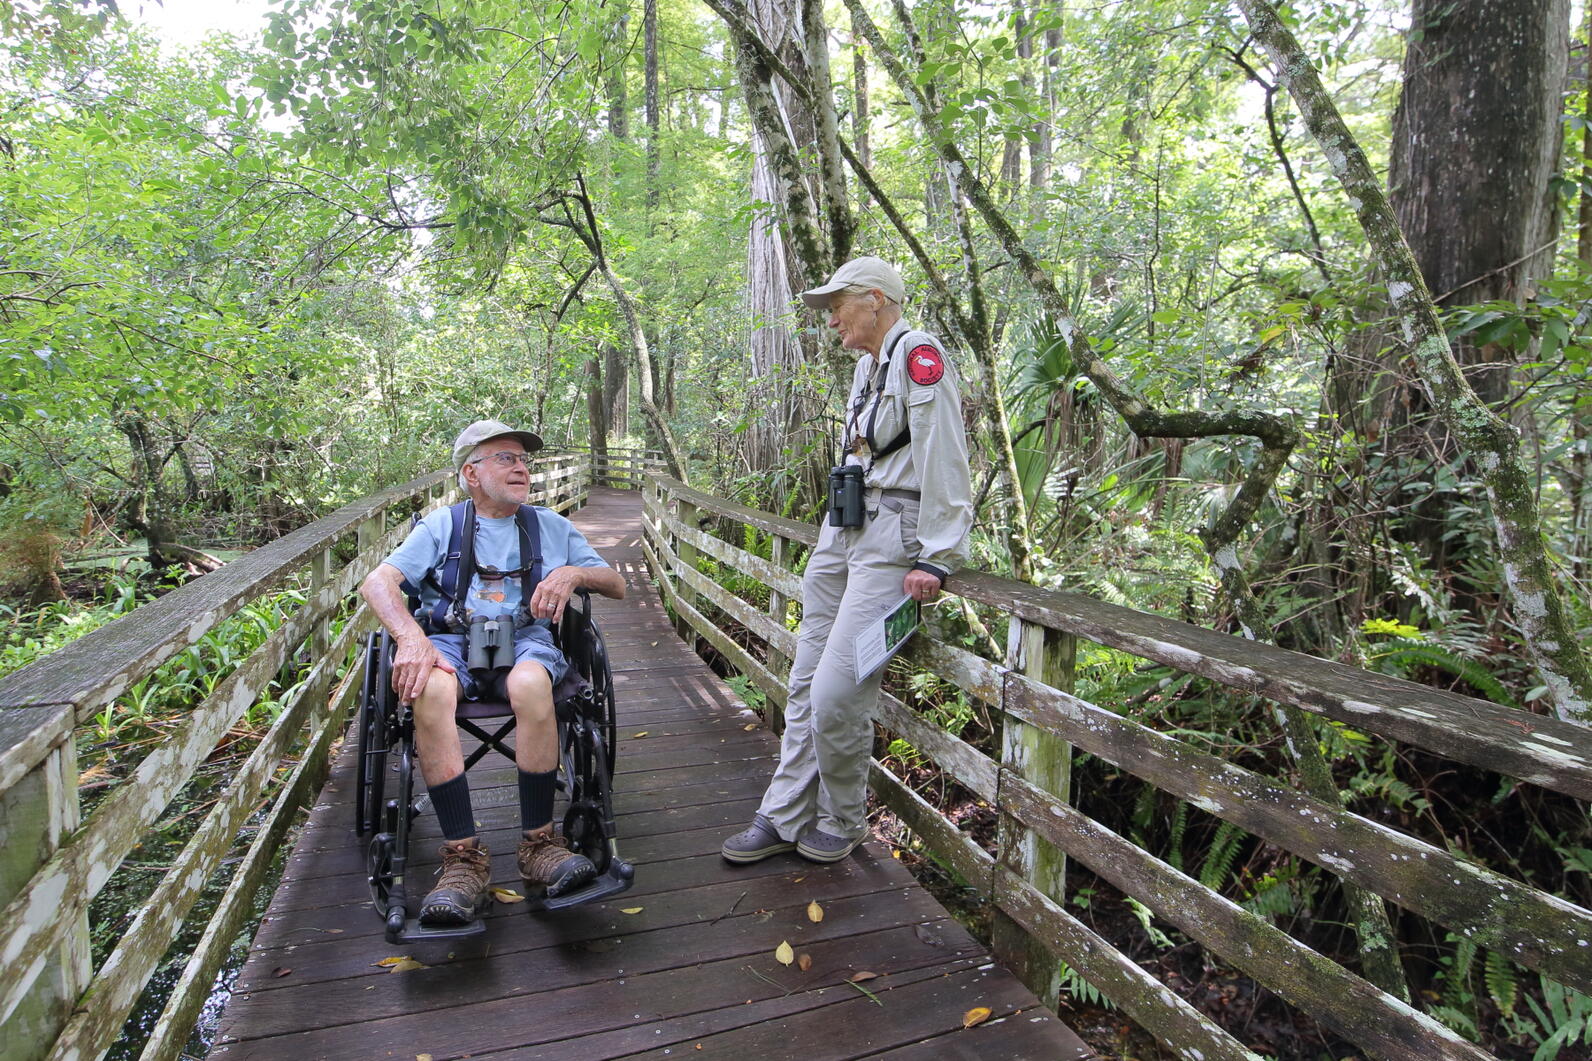 A man in a wheelchair speaking with someone in uniform on a boardwalk